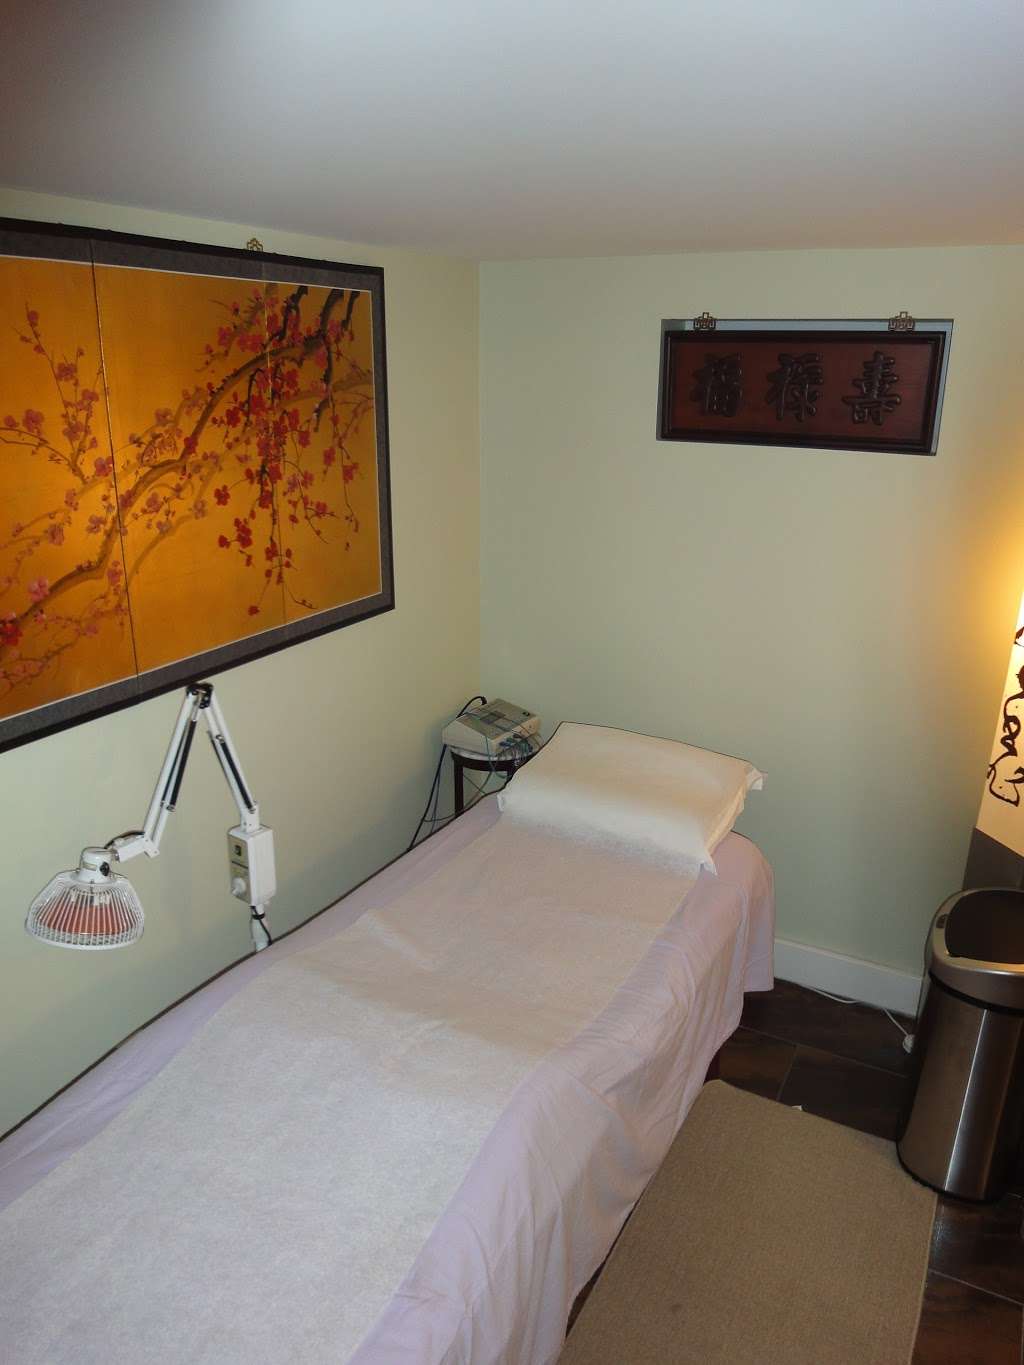 Acupuncture My Way | 280 Burr Rd, Commack, NY 11725, USA | Phone: (631) 533-0055